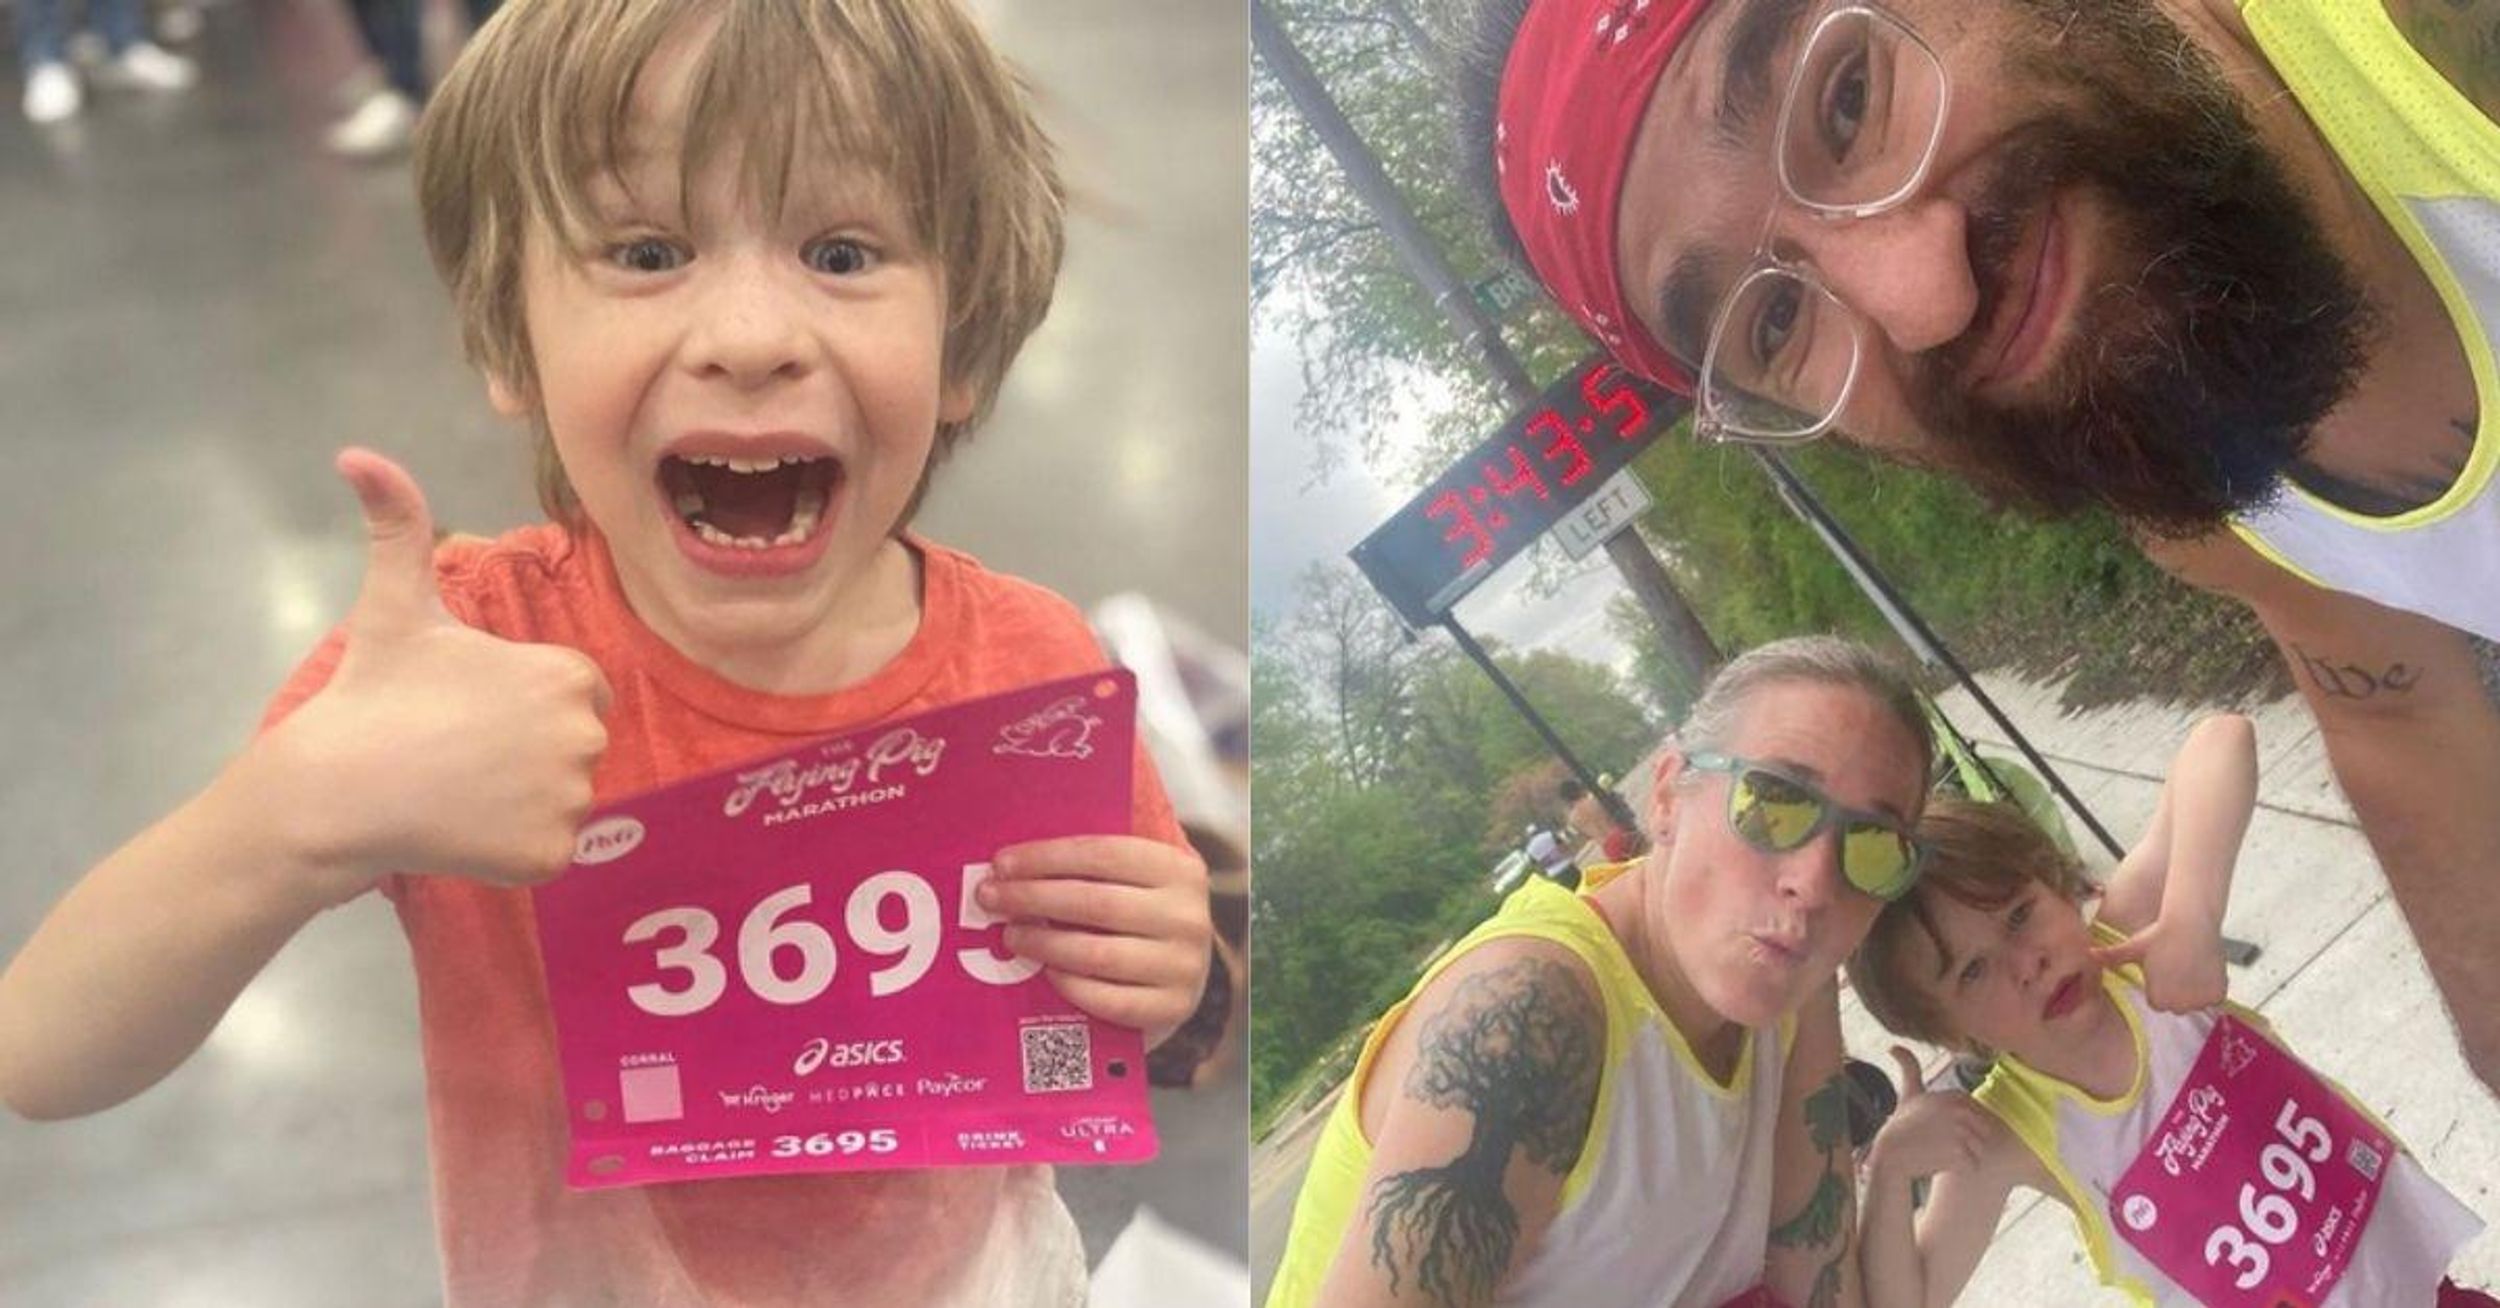 YouTuber Family Sparks Backlash After Making Their 6-Year-Old Son Run A Marathon With Them